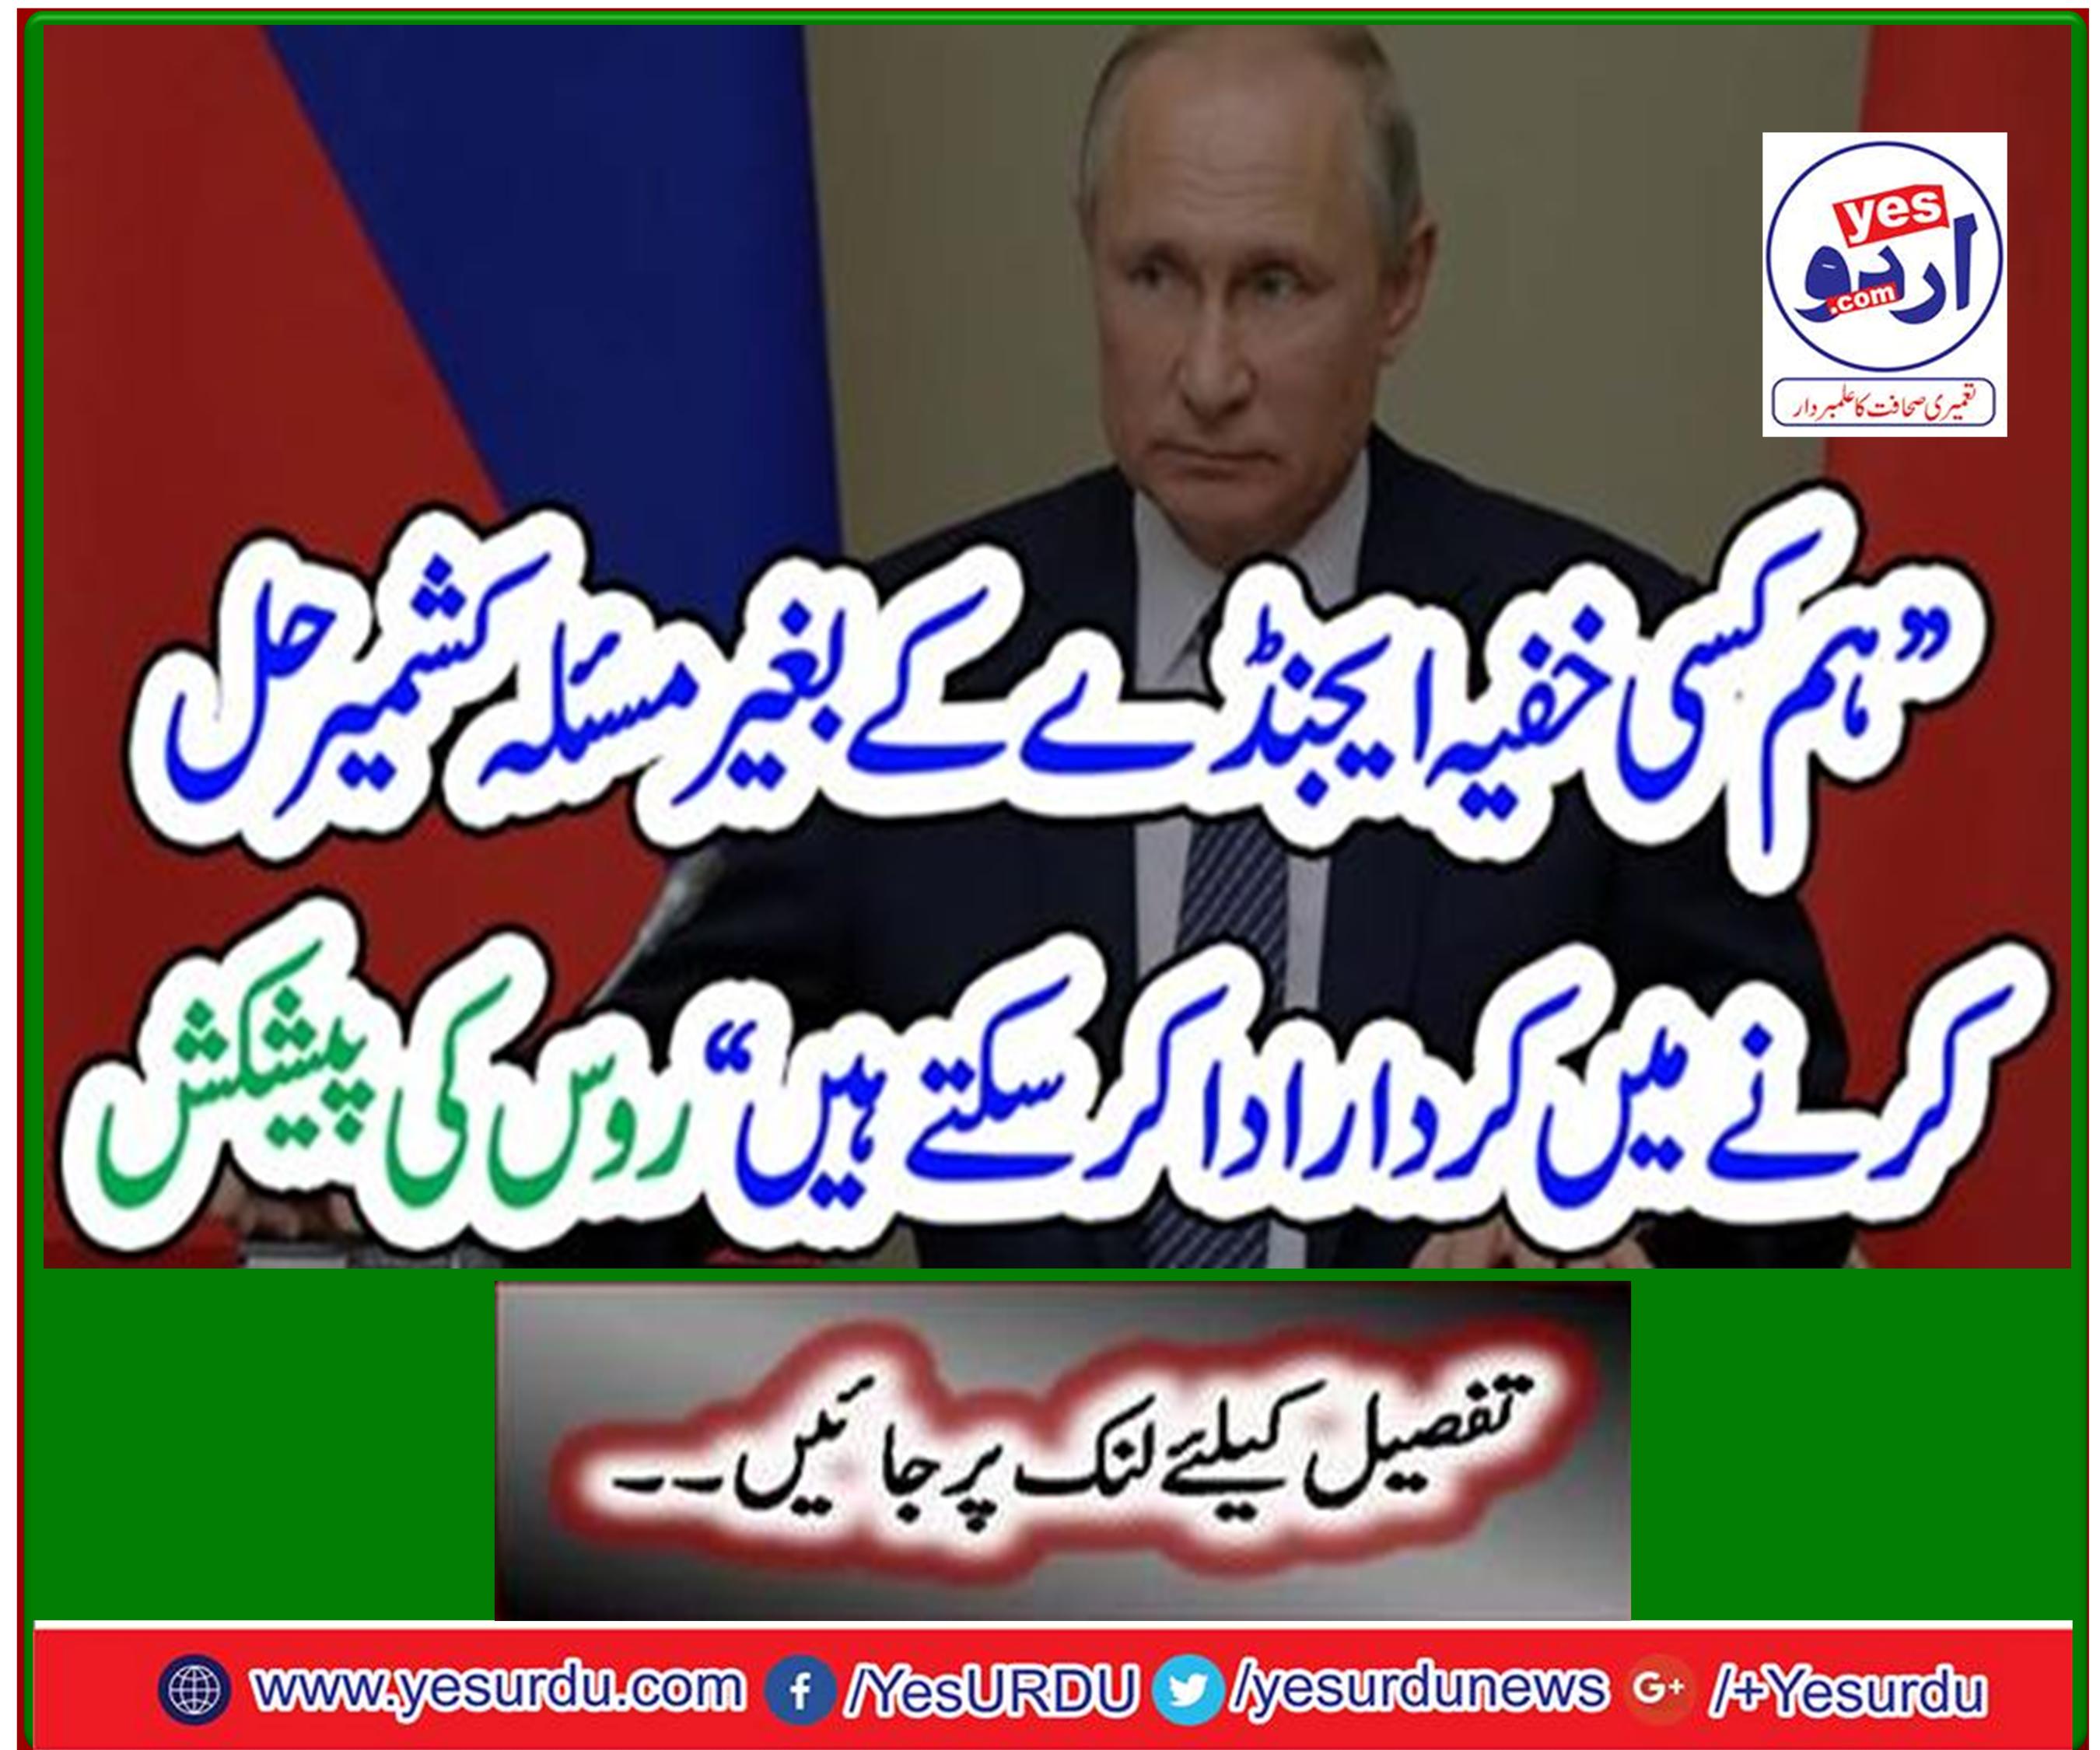 Russia offers "We can play a role in resolving Kashmir without a secret agenda"